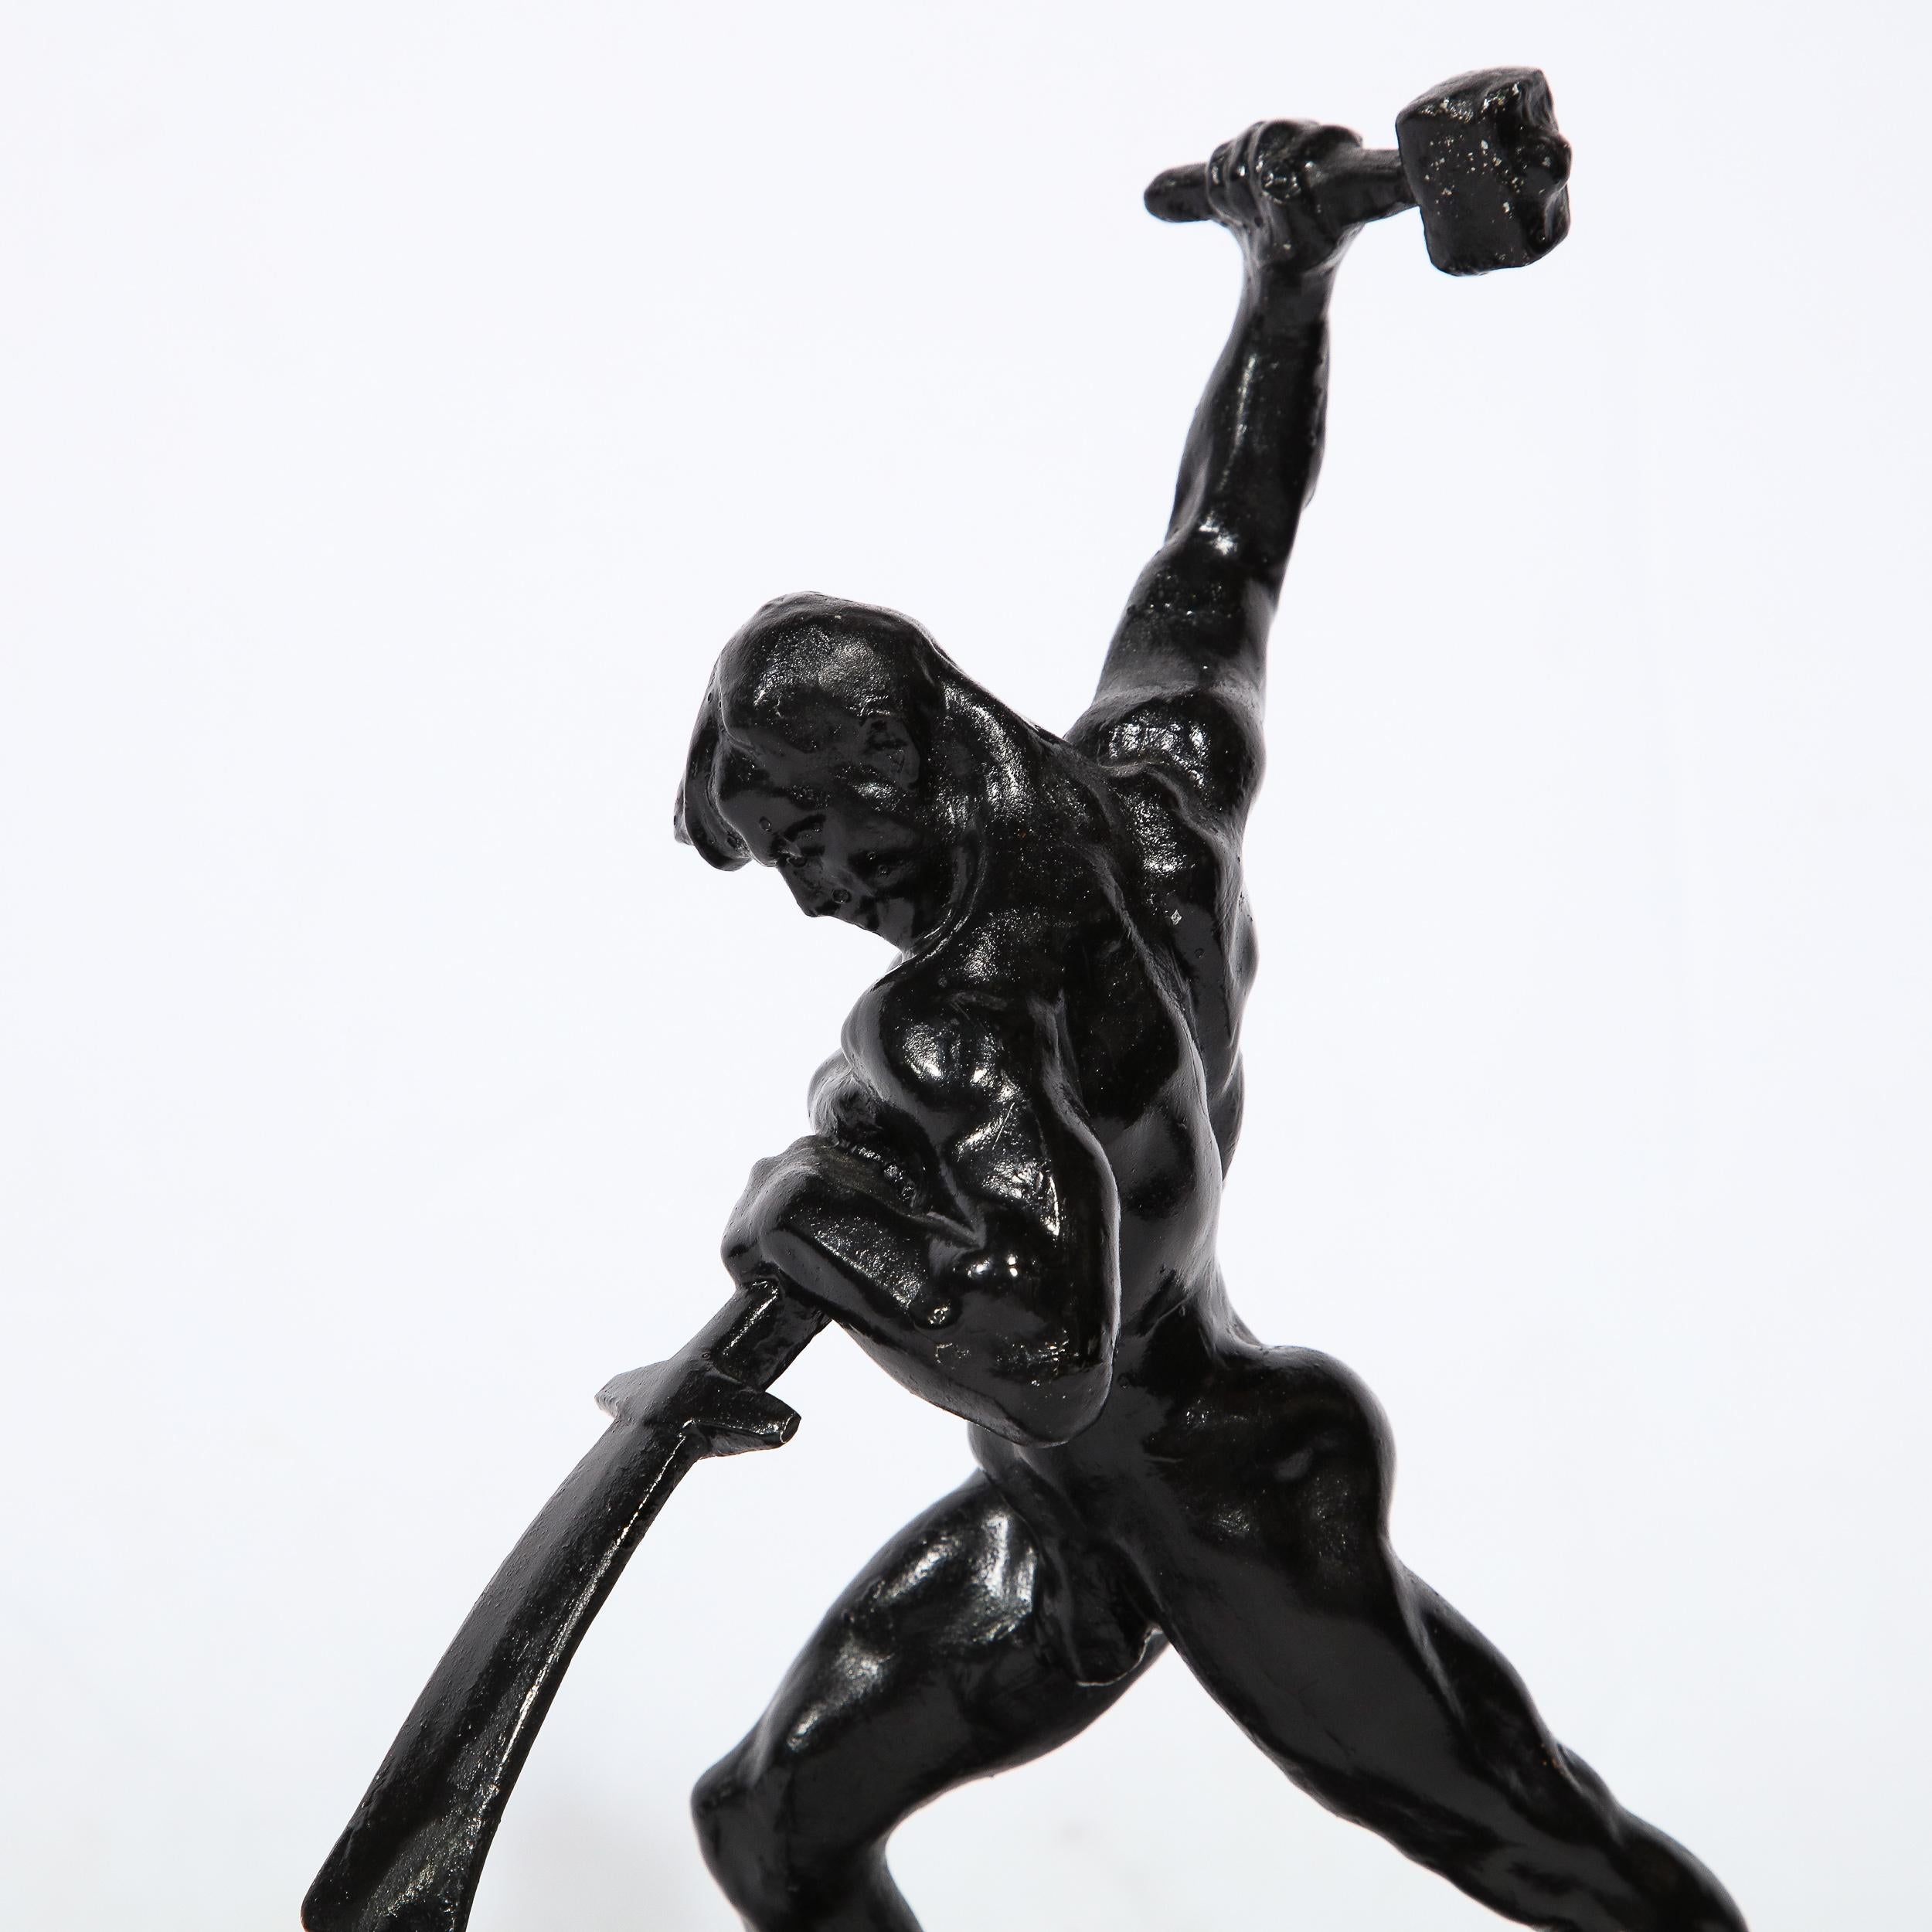 Modernist 20th Century Soviet Russian Nude Male Sculpture in Blackened Bronze For Sale 2